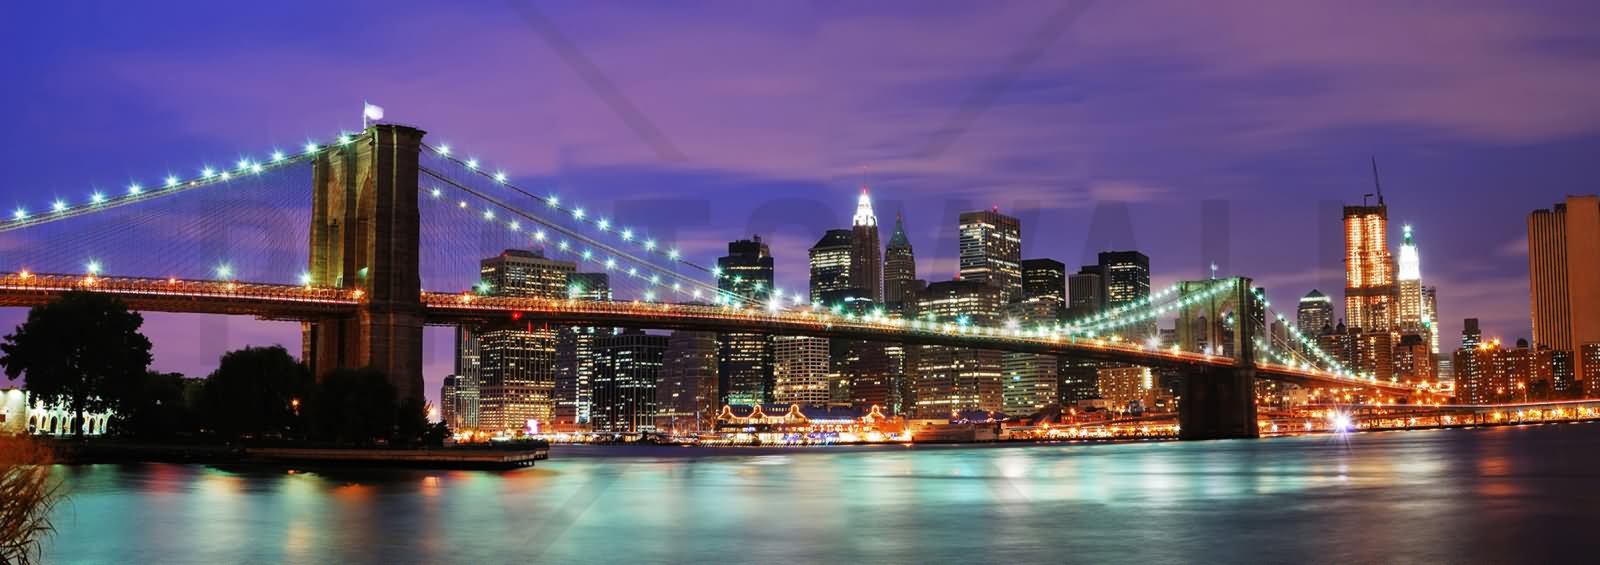 Panorama View Picture Of Brooklyn Bridge At Night